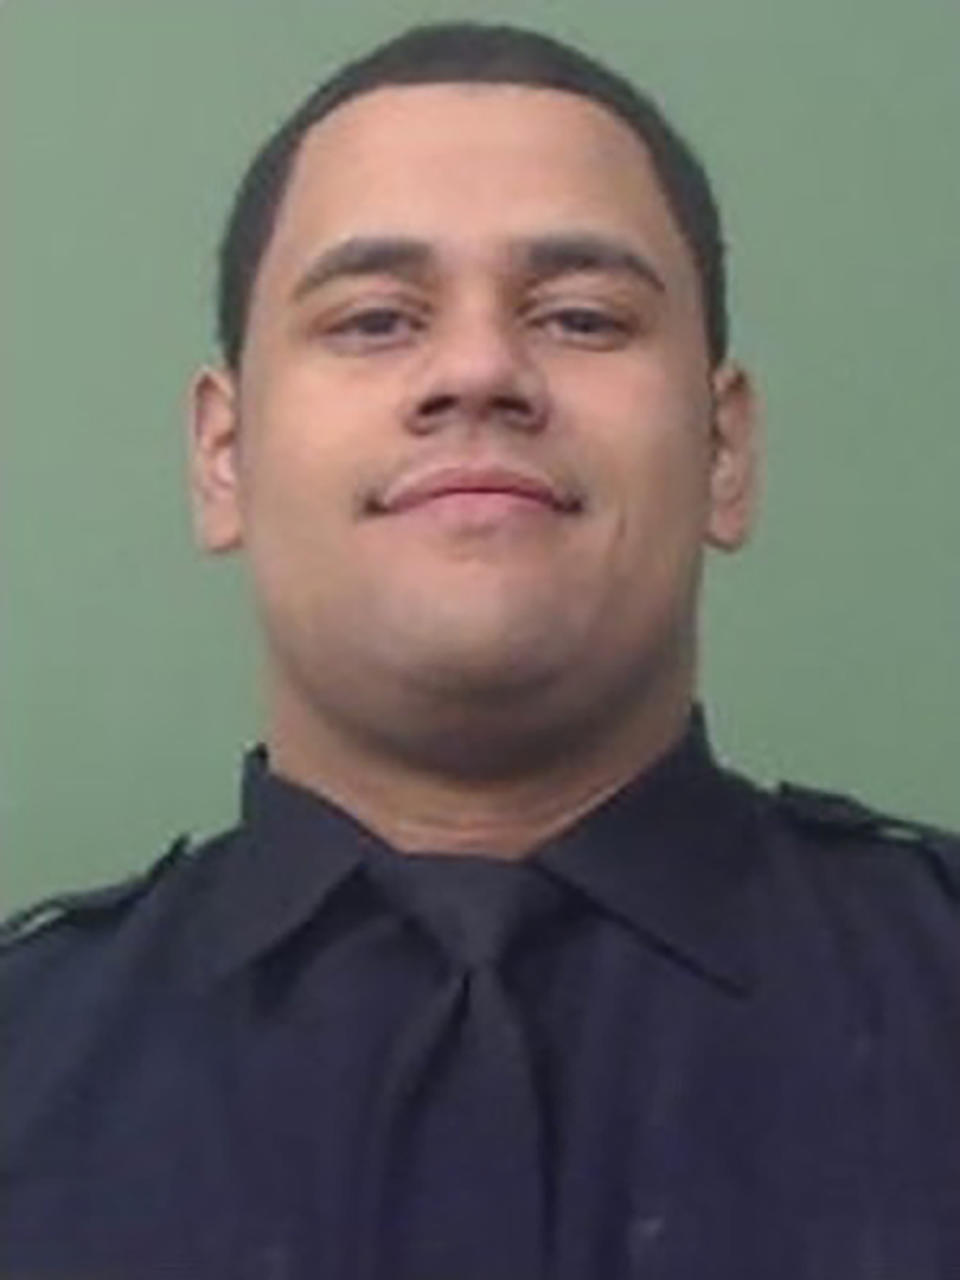 In an undated photo provided by the New York City Police Department, NYPD Officer Wilbert Mora, who was involved in a police shooting, Friday, Jan. 21, 2022, in New York City, is shown. Officials say Mora, 27, was critically wounded while fellow officer Jason Rivera, 22, was killed in a shooting in the Harlem neighborhood of New York. The officers had been responding to a call Friday about an argument between a woman and her adult son. (Courtesy of NYPD via AP)